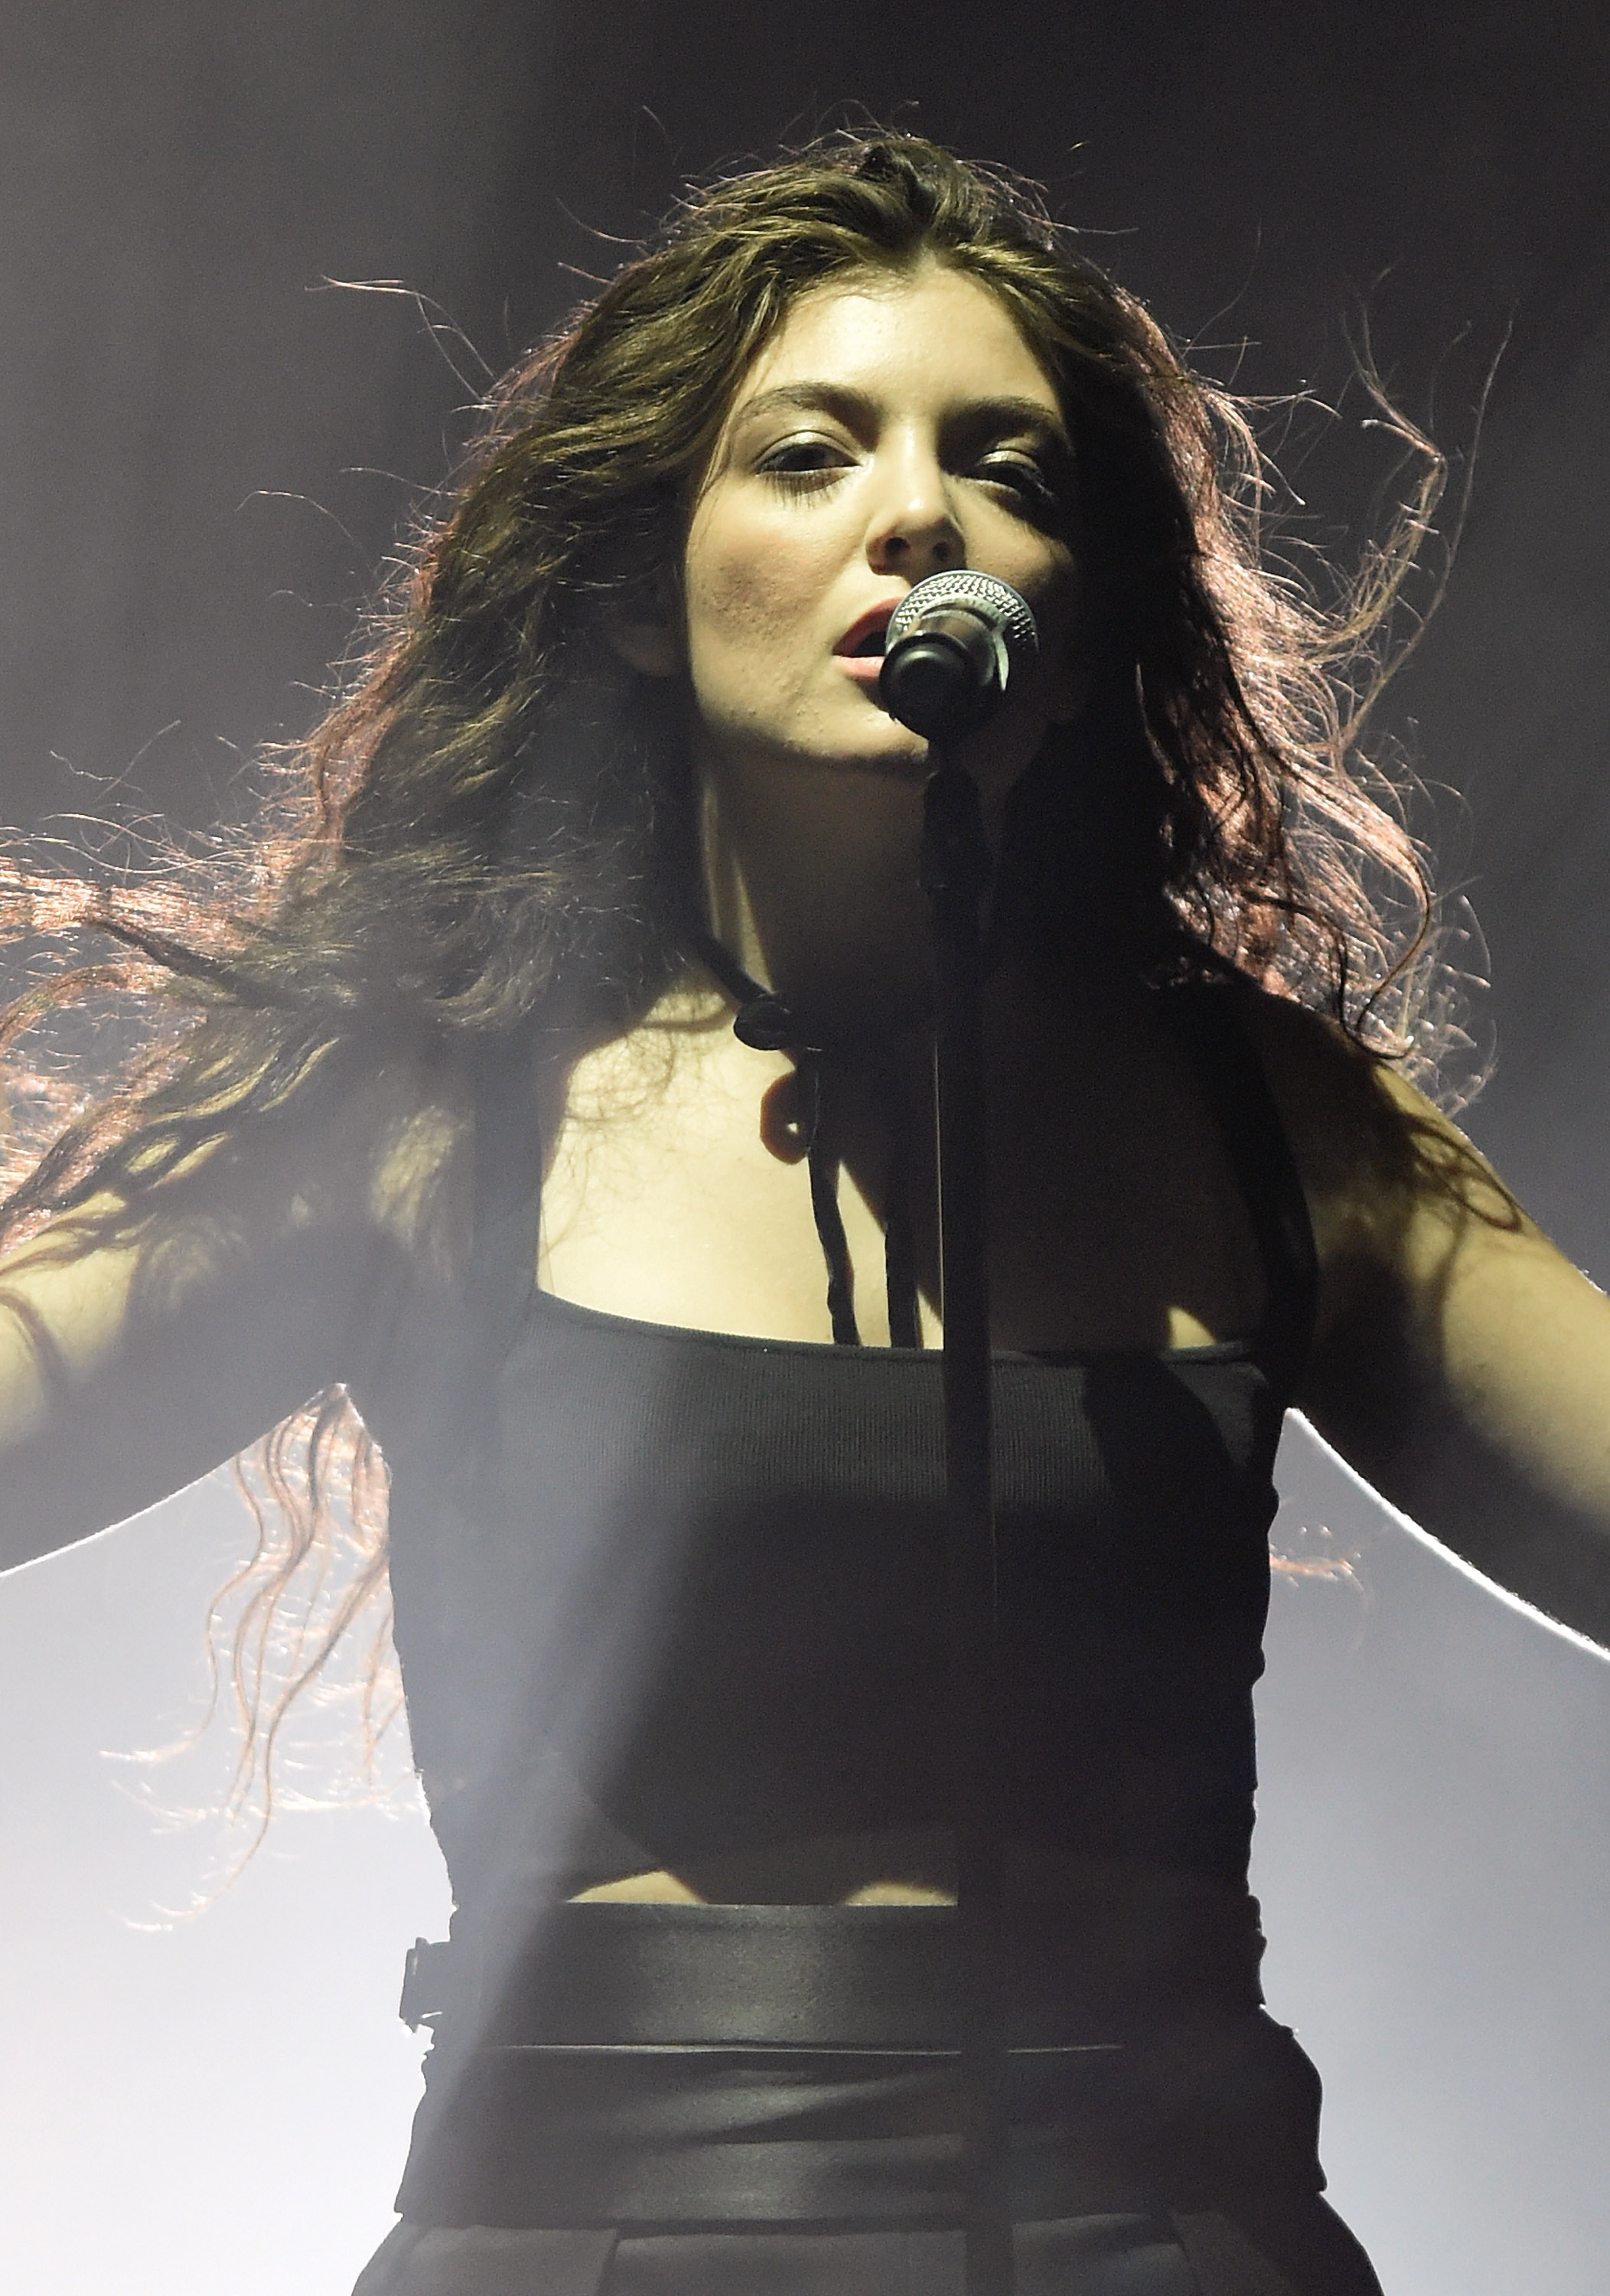 Lorde takes her 'South Park' parody well | wtsp.com